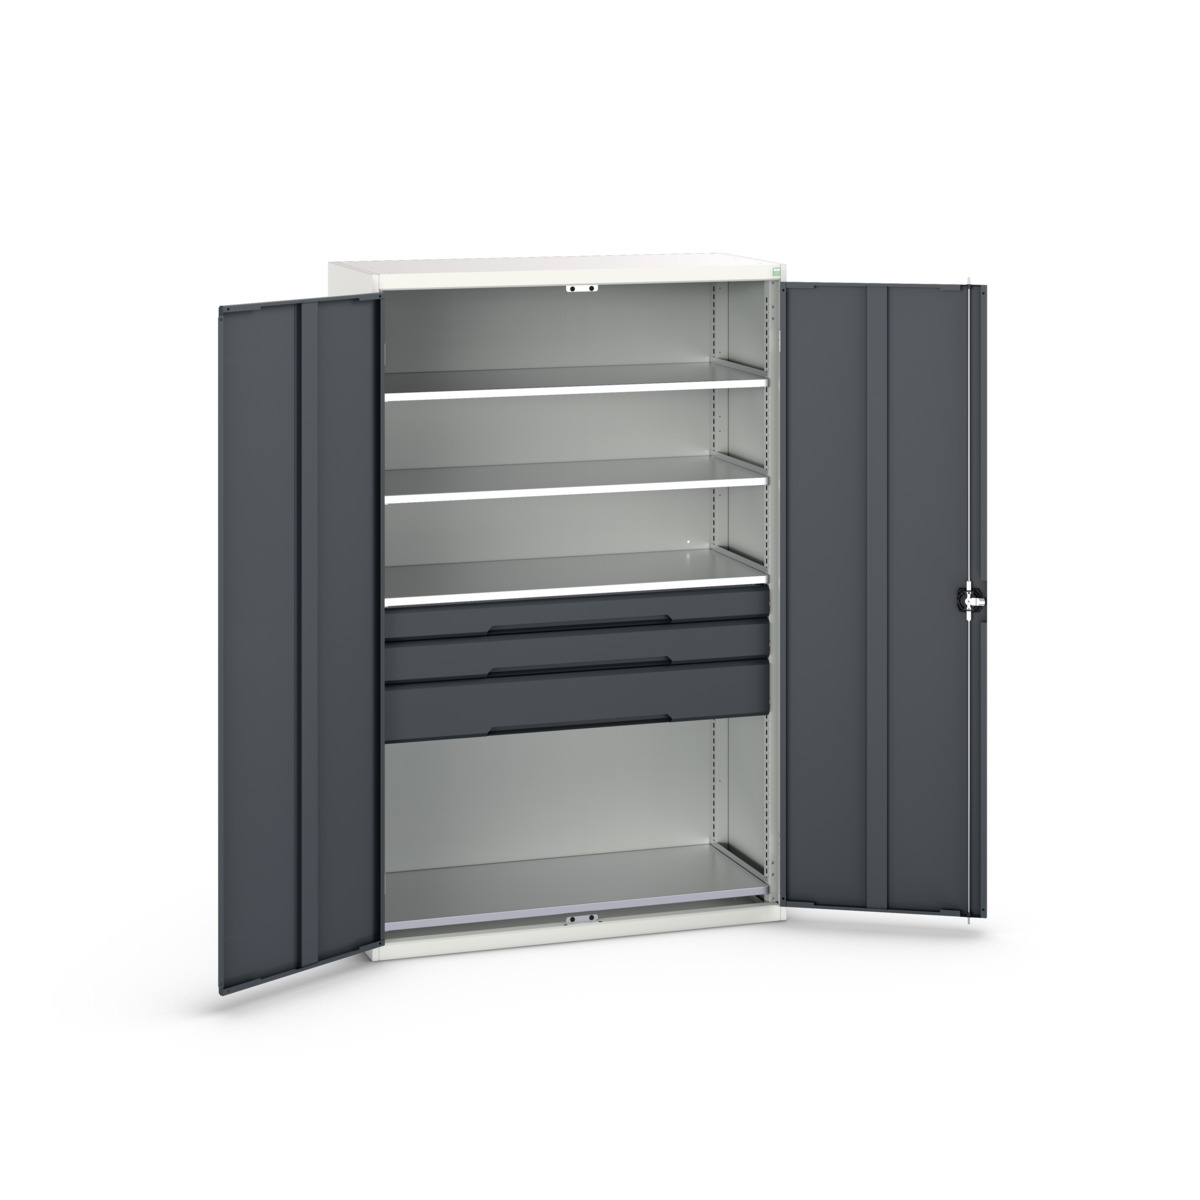 16926655. - verso kitted cupboard